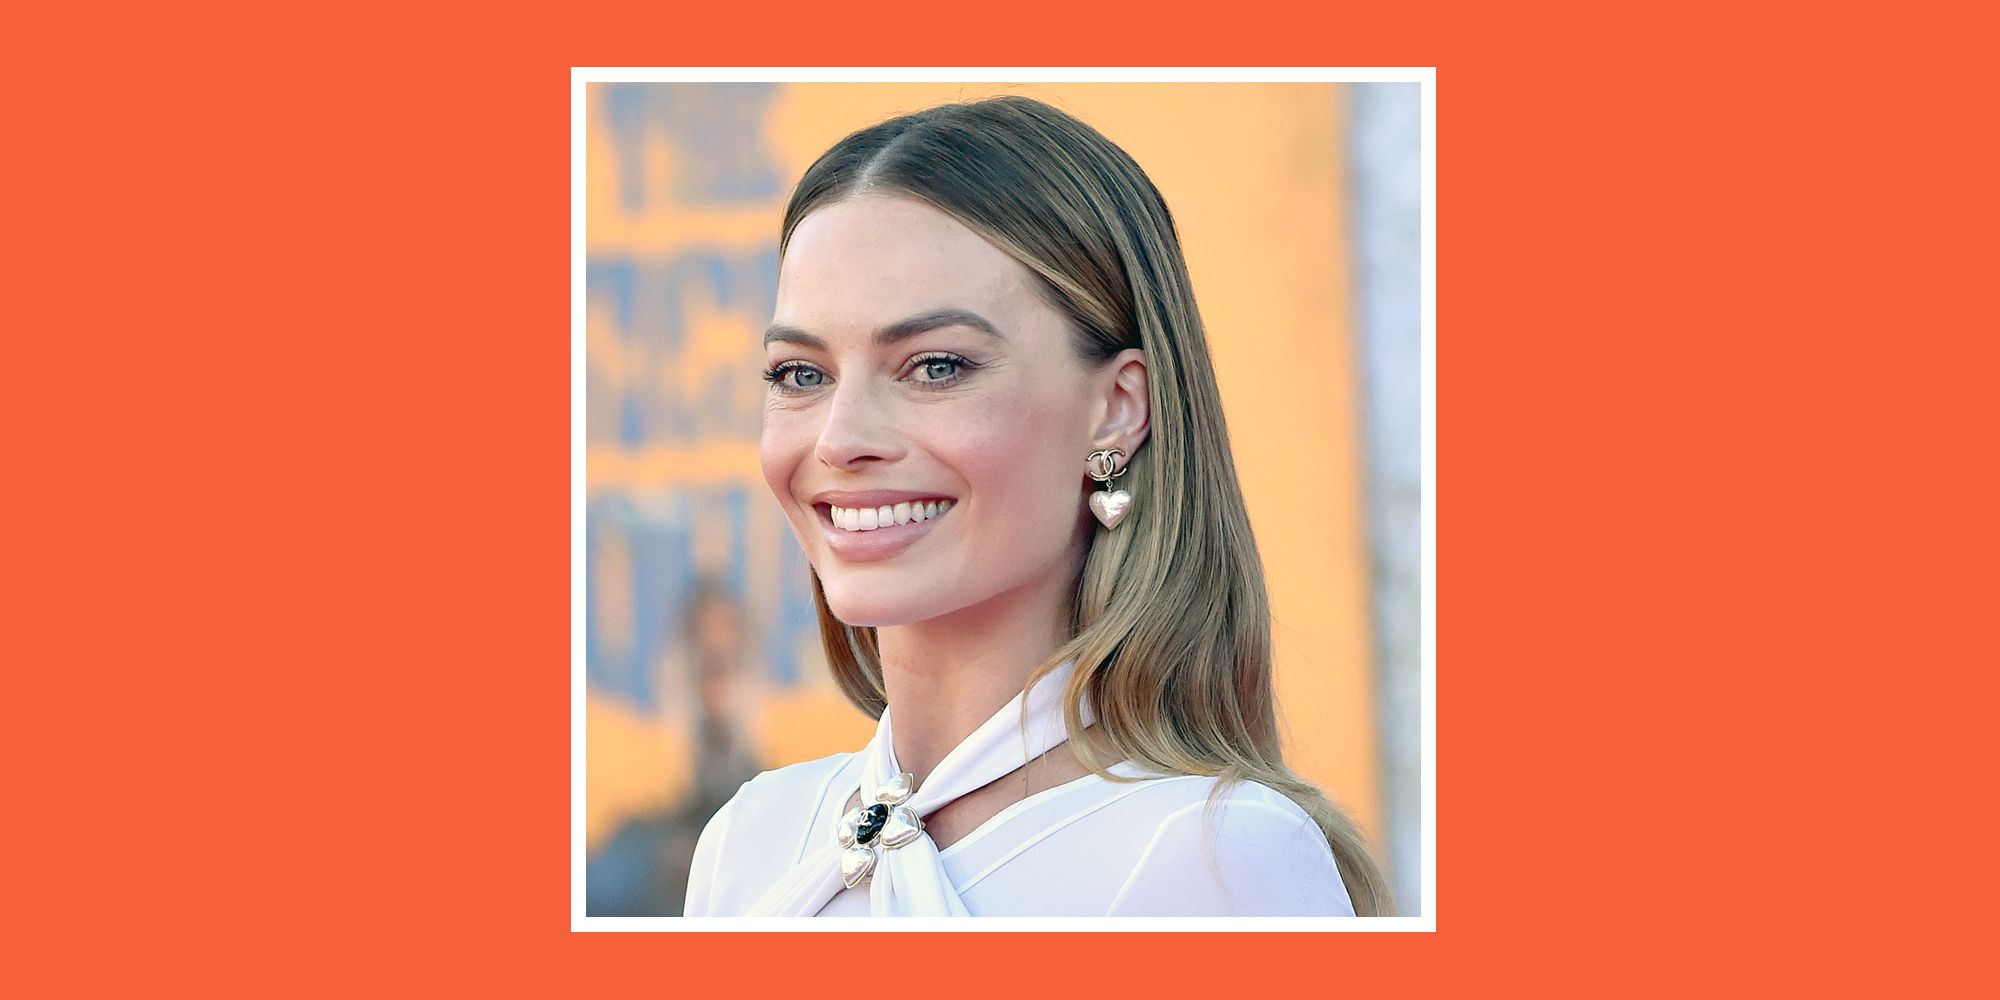 Margot Robbie on Her Favorite Concealer and Can't-Live-Without